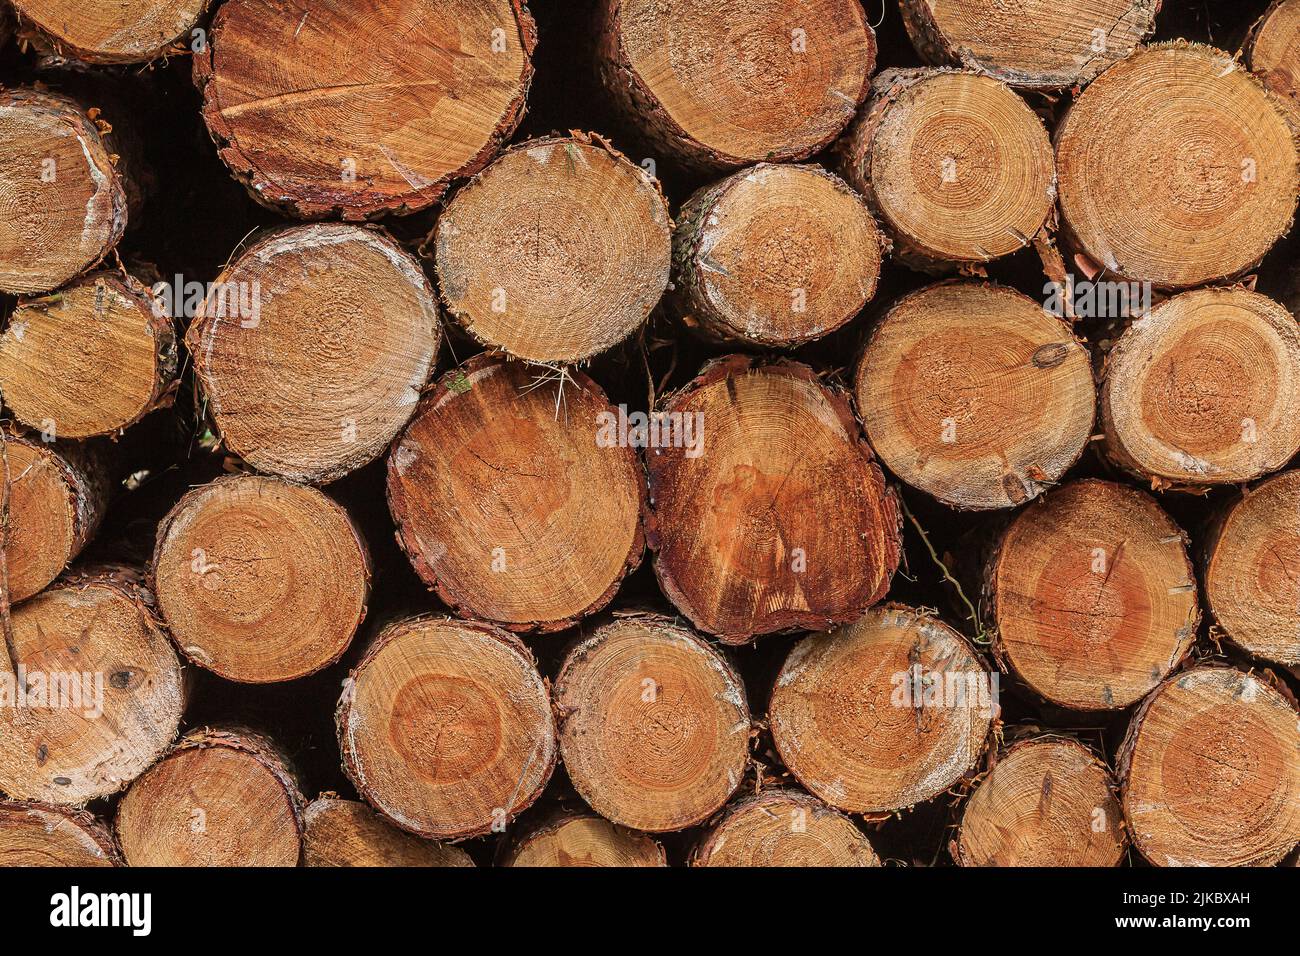 View of many stacked logs. Sorted wood at harvest time. stacked pine trunks after felling. Many sawed logs with visible growth rings. reddish colour Stock Photo